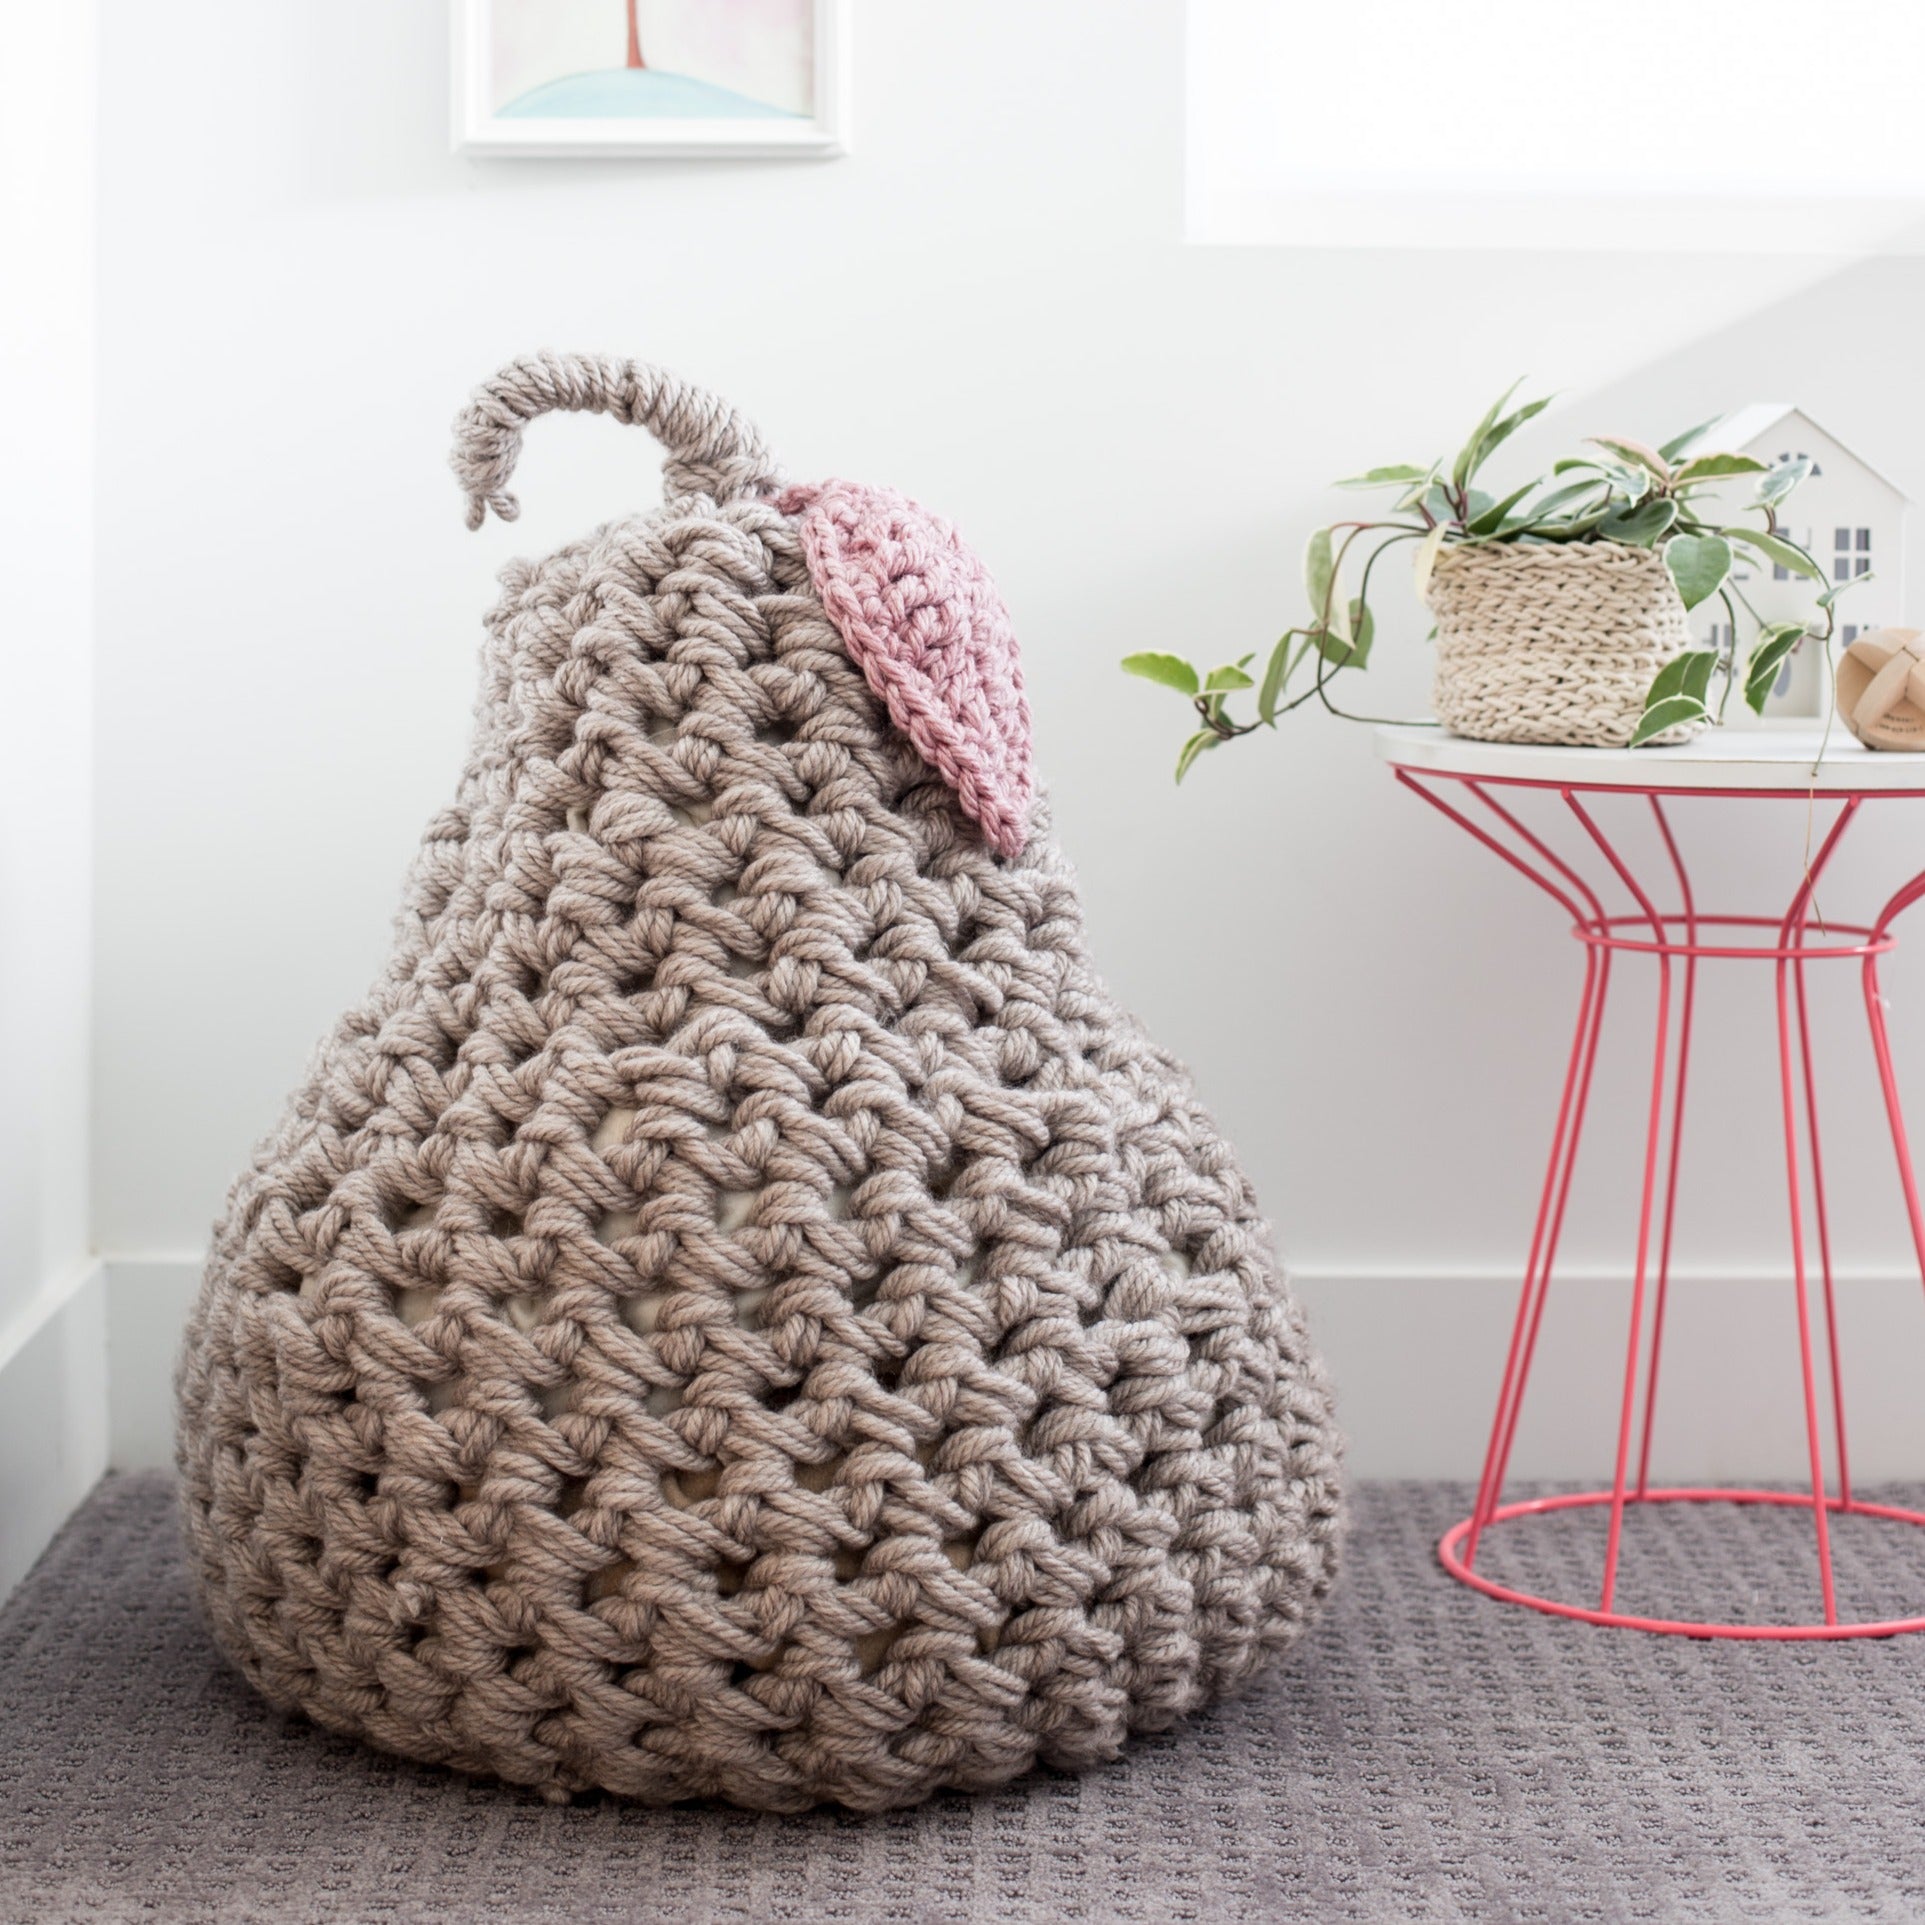 Giant Apple and Pear Pouf Pattern